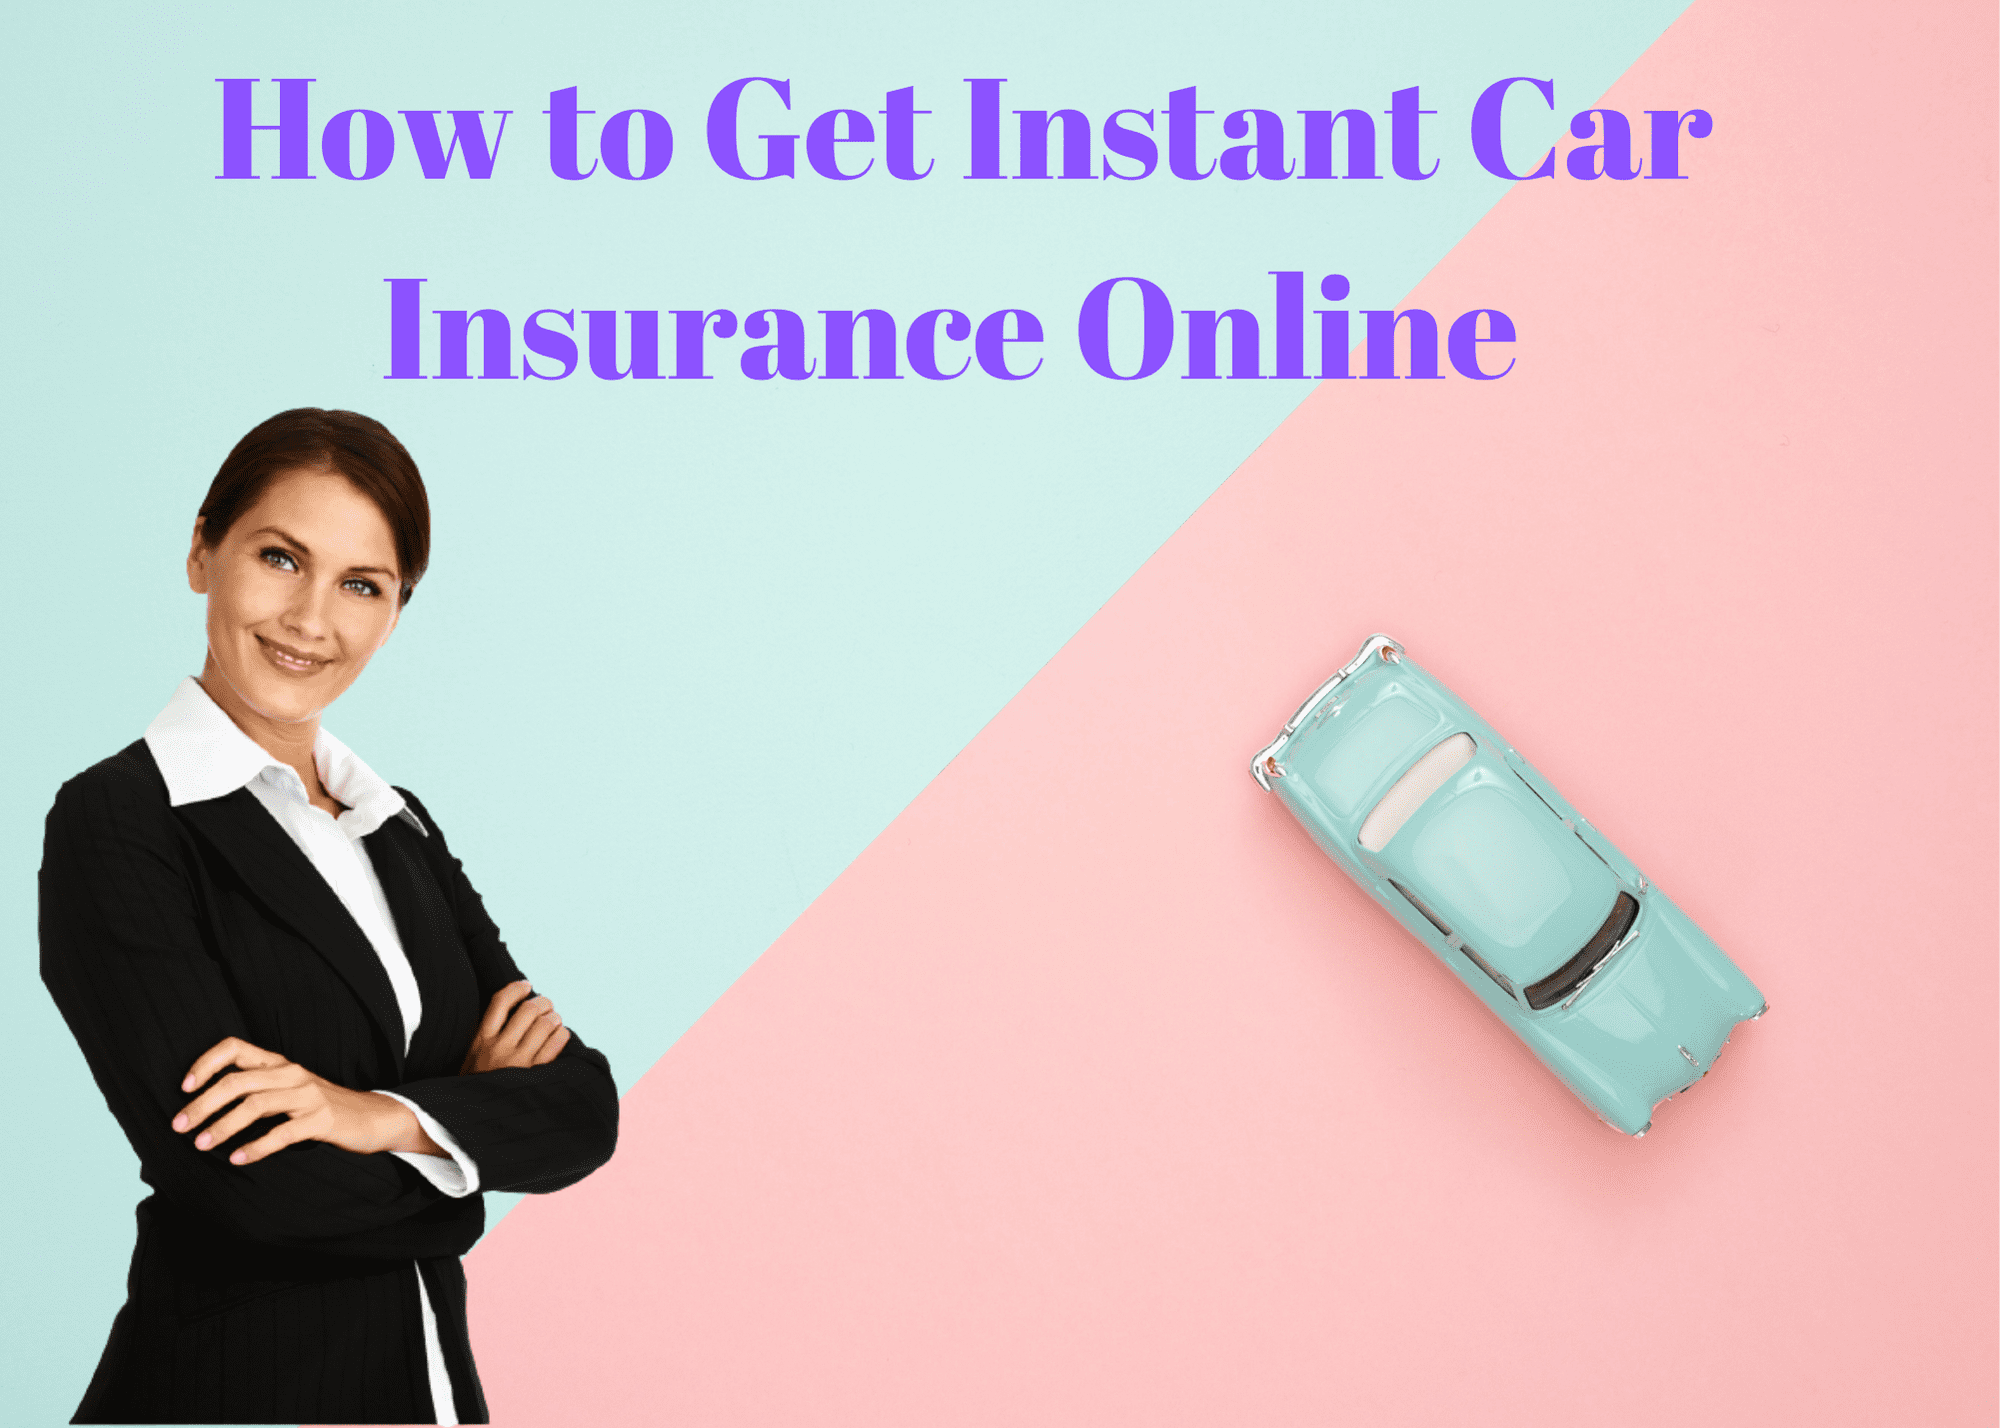 Here Is How to Get Your Instant Car Insurance Online In The USA